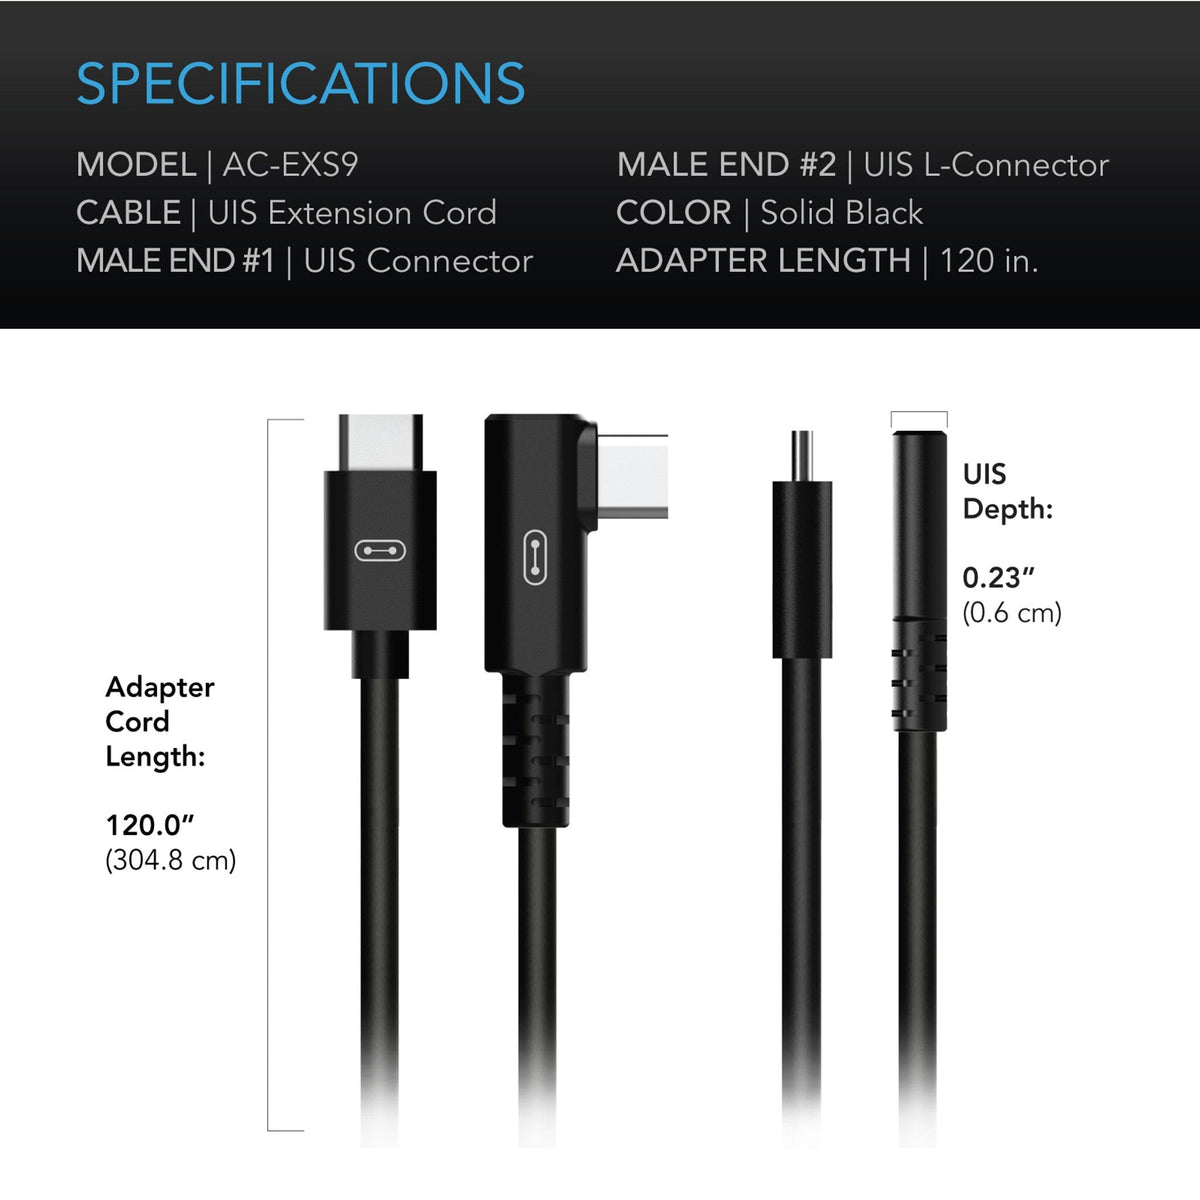 L-shaped specifications